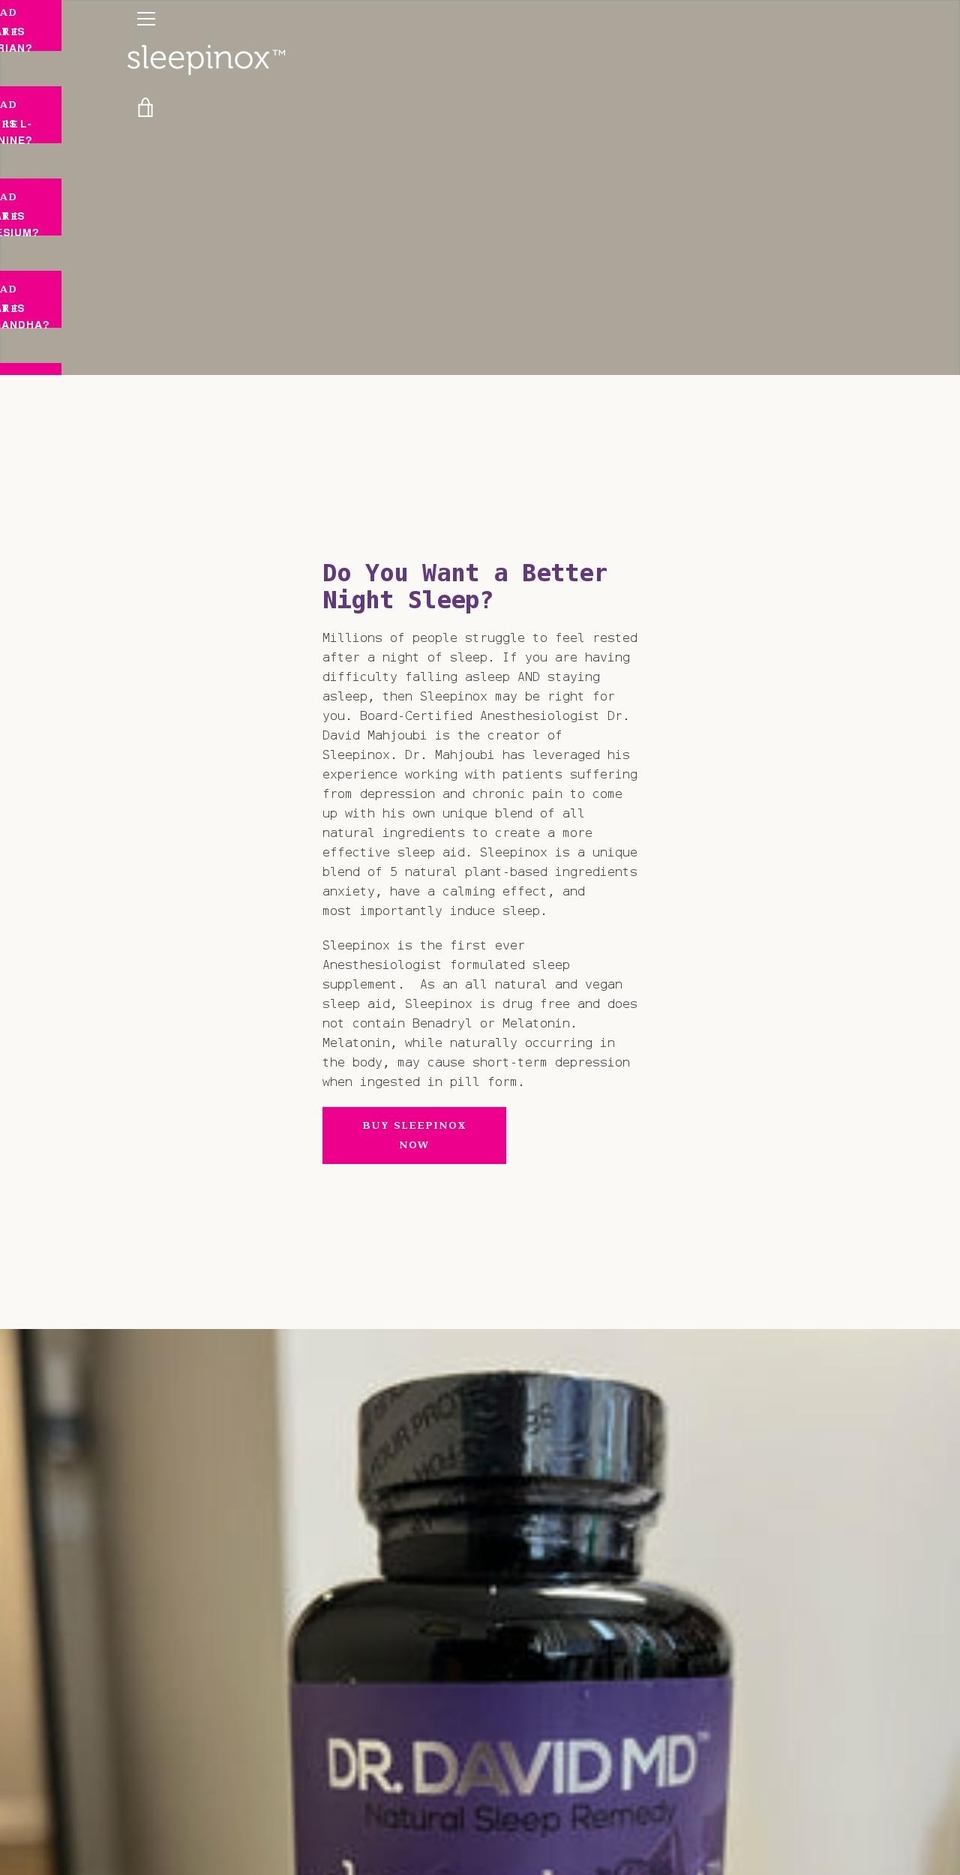 Narrative with Installments message Shopify theme site example sleepinox.com